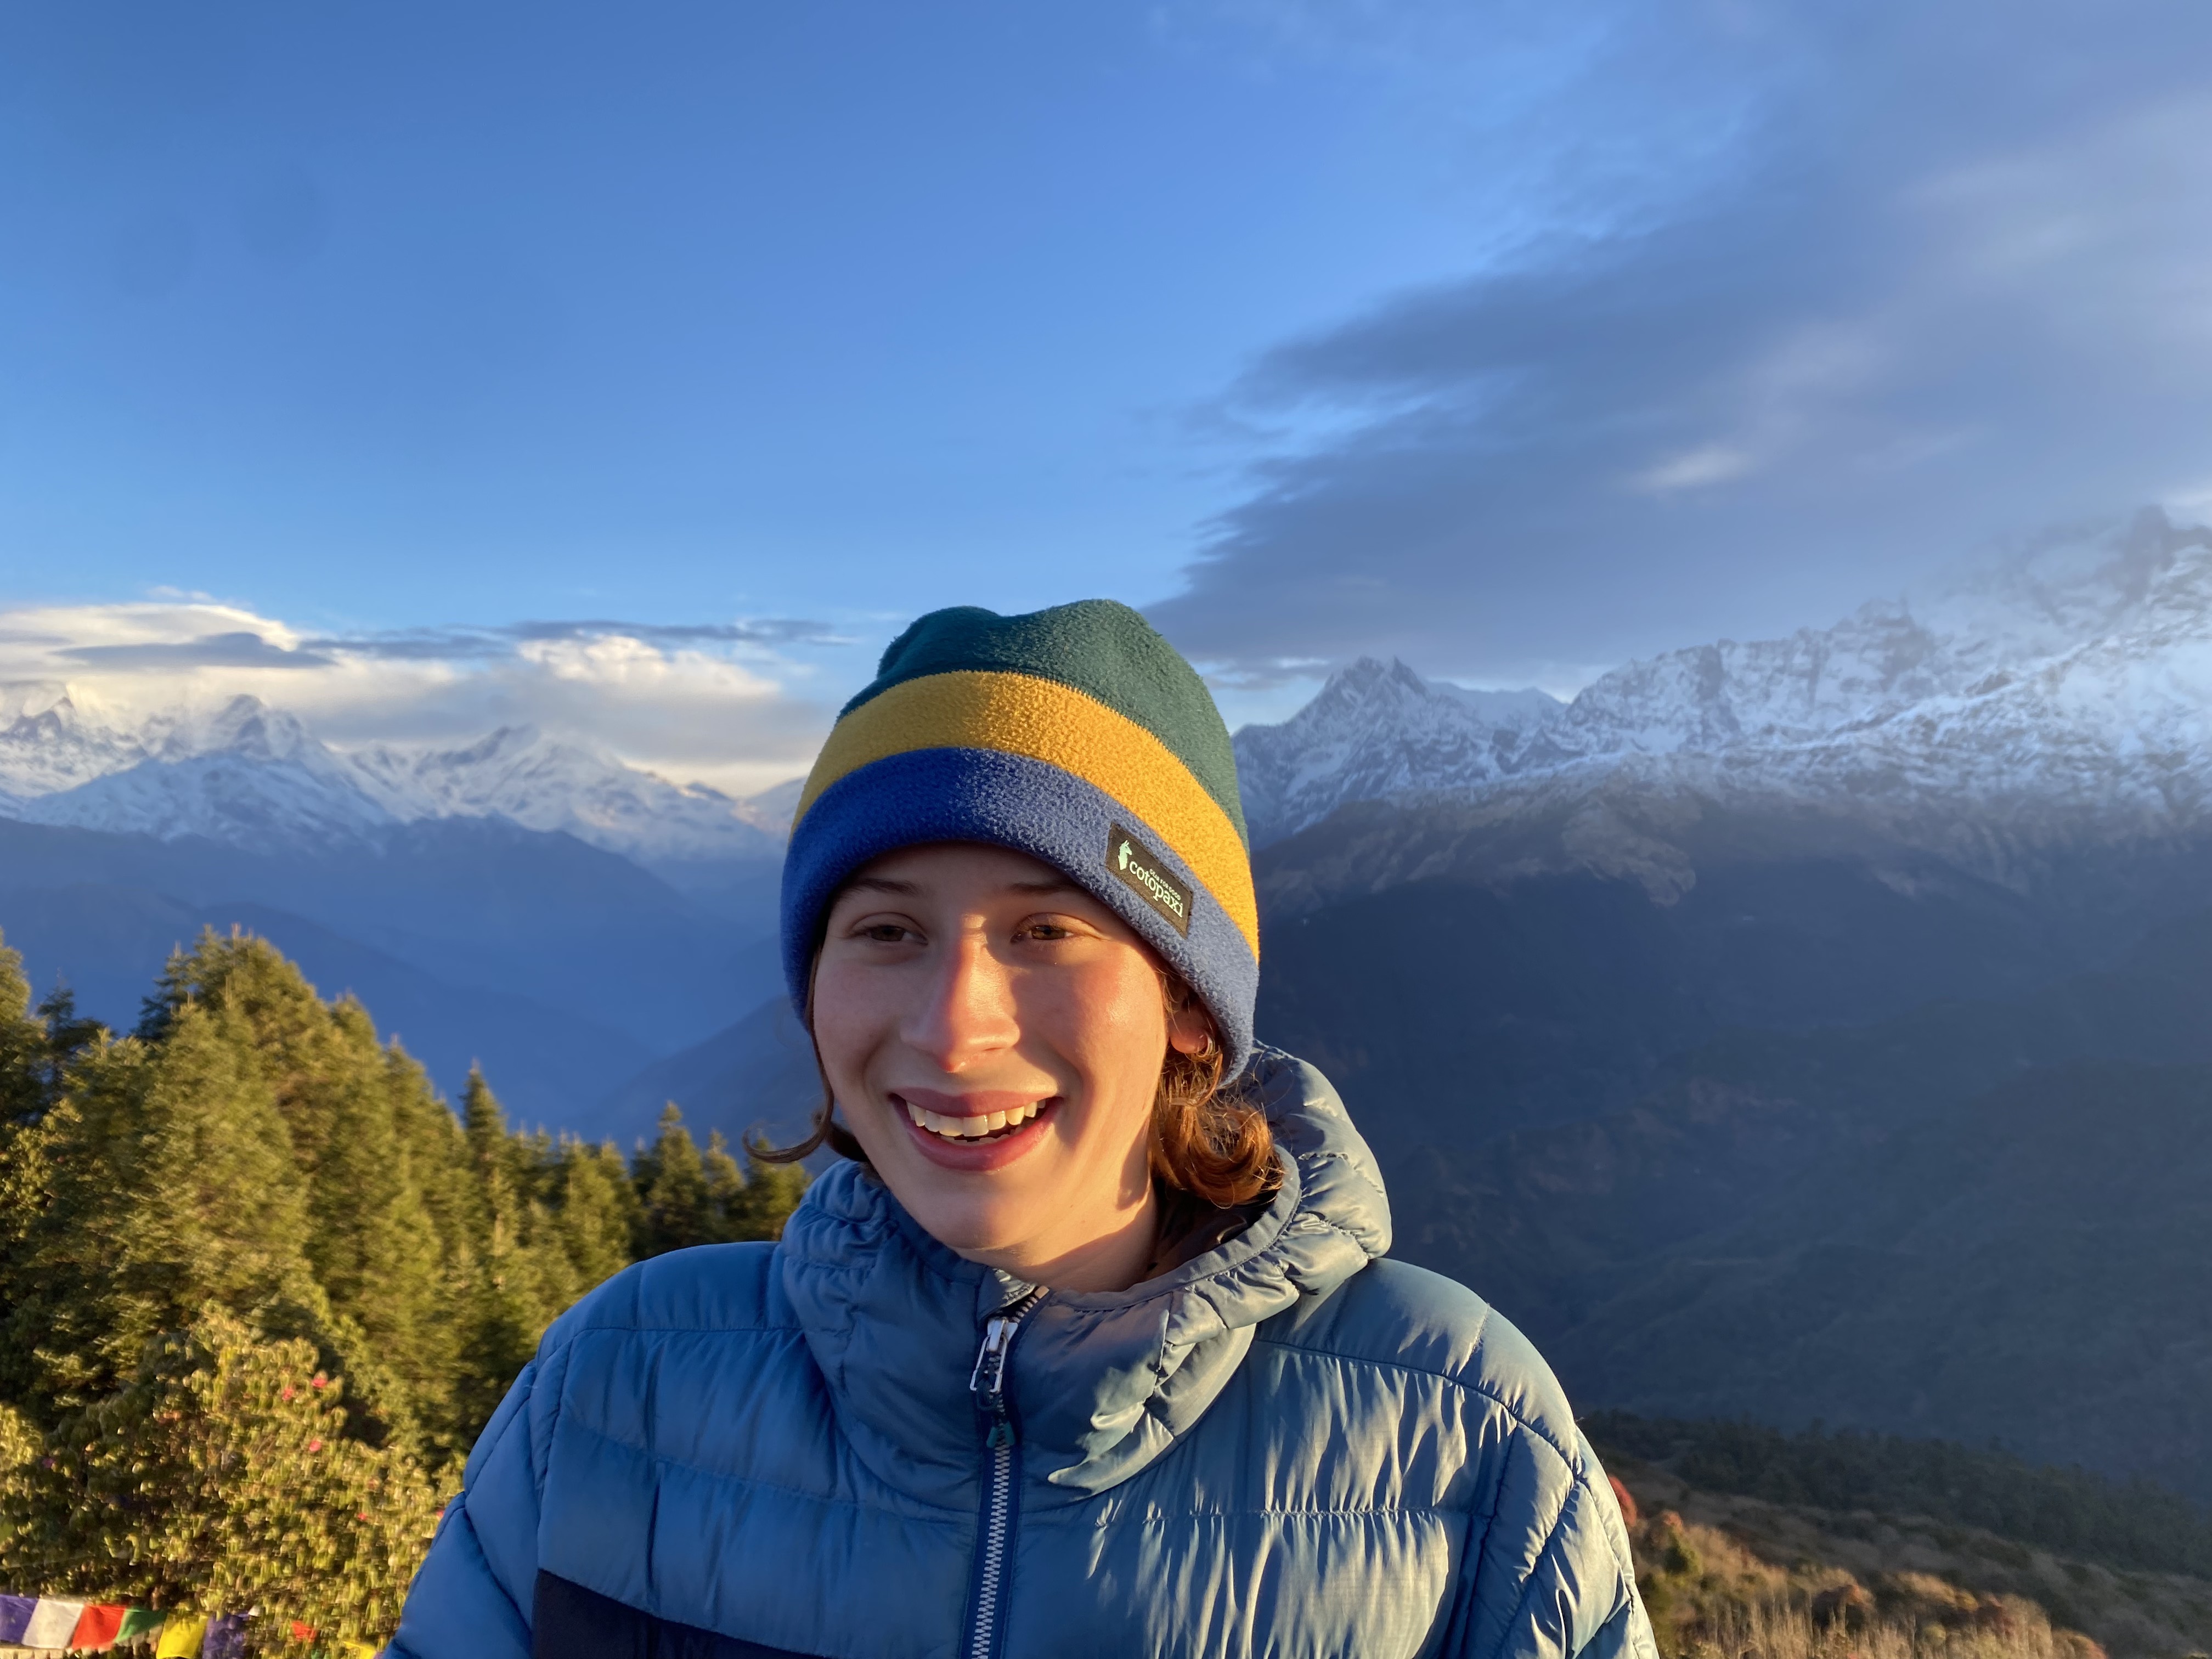 A close-up of Caroline smiling in a winter hat on a mountain in Nepal.